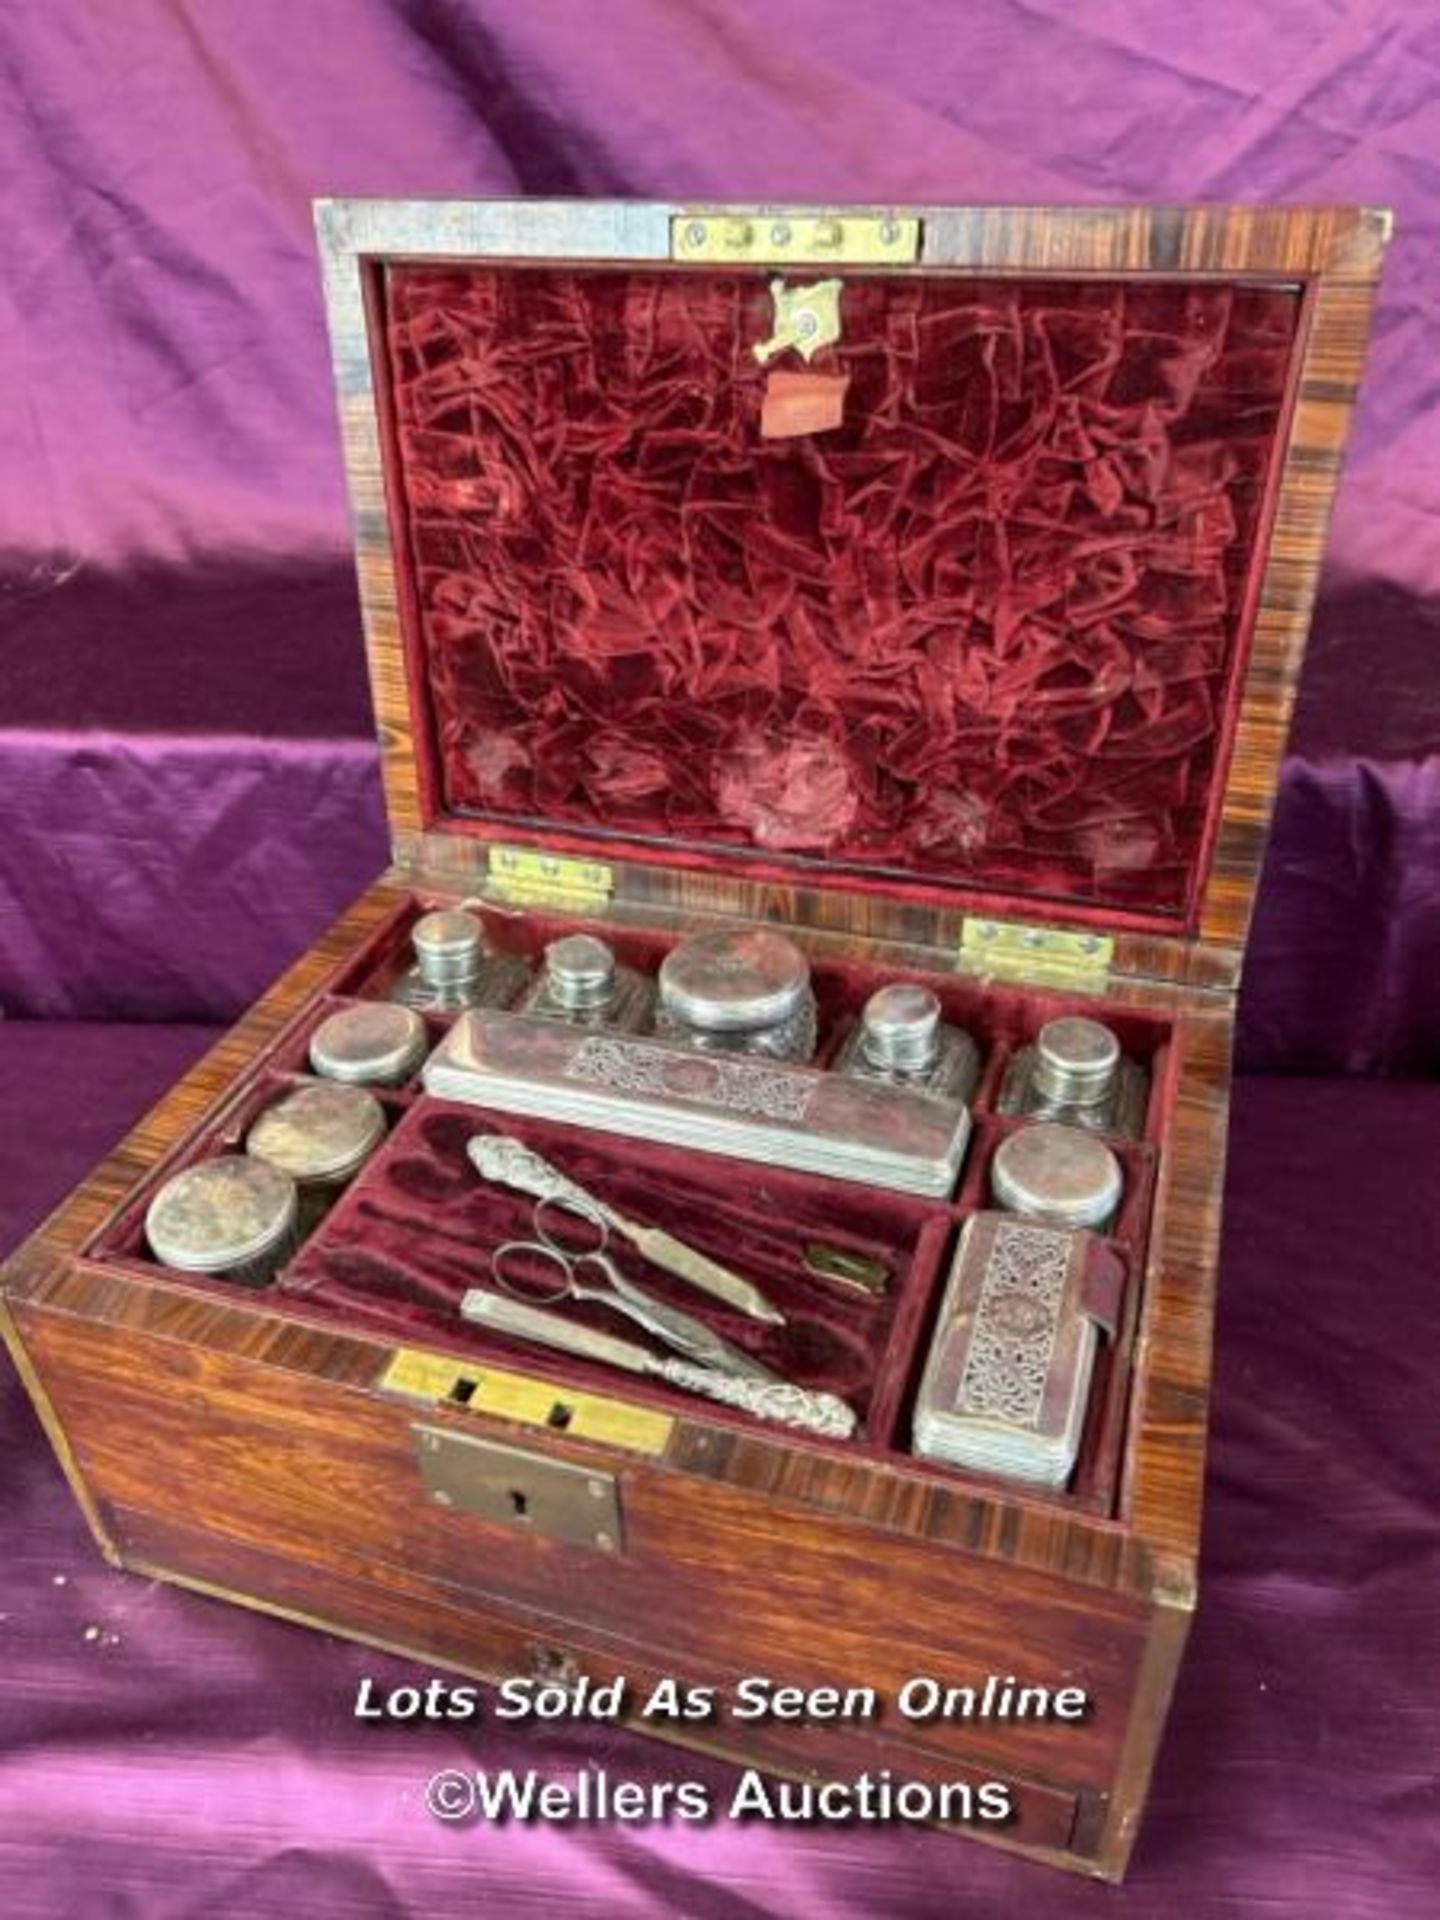 EARLY 19TH CENTURY GENTLEMAN'S VANITY BOX CONTAINING STERLING SILVER AND GLASS CONTAINERS, WITHOUT